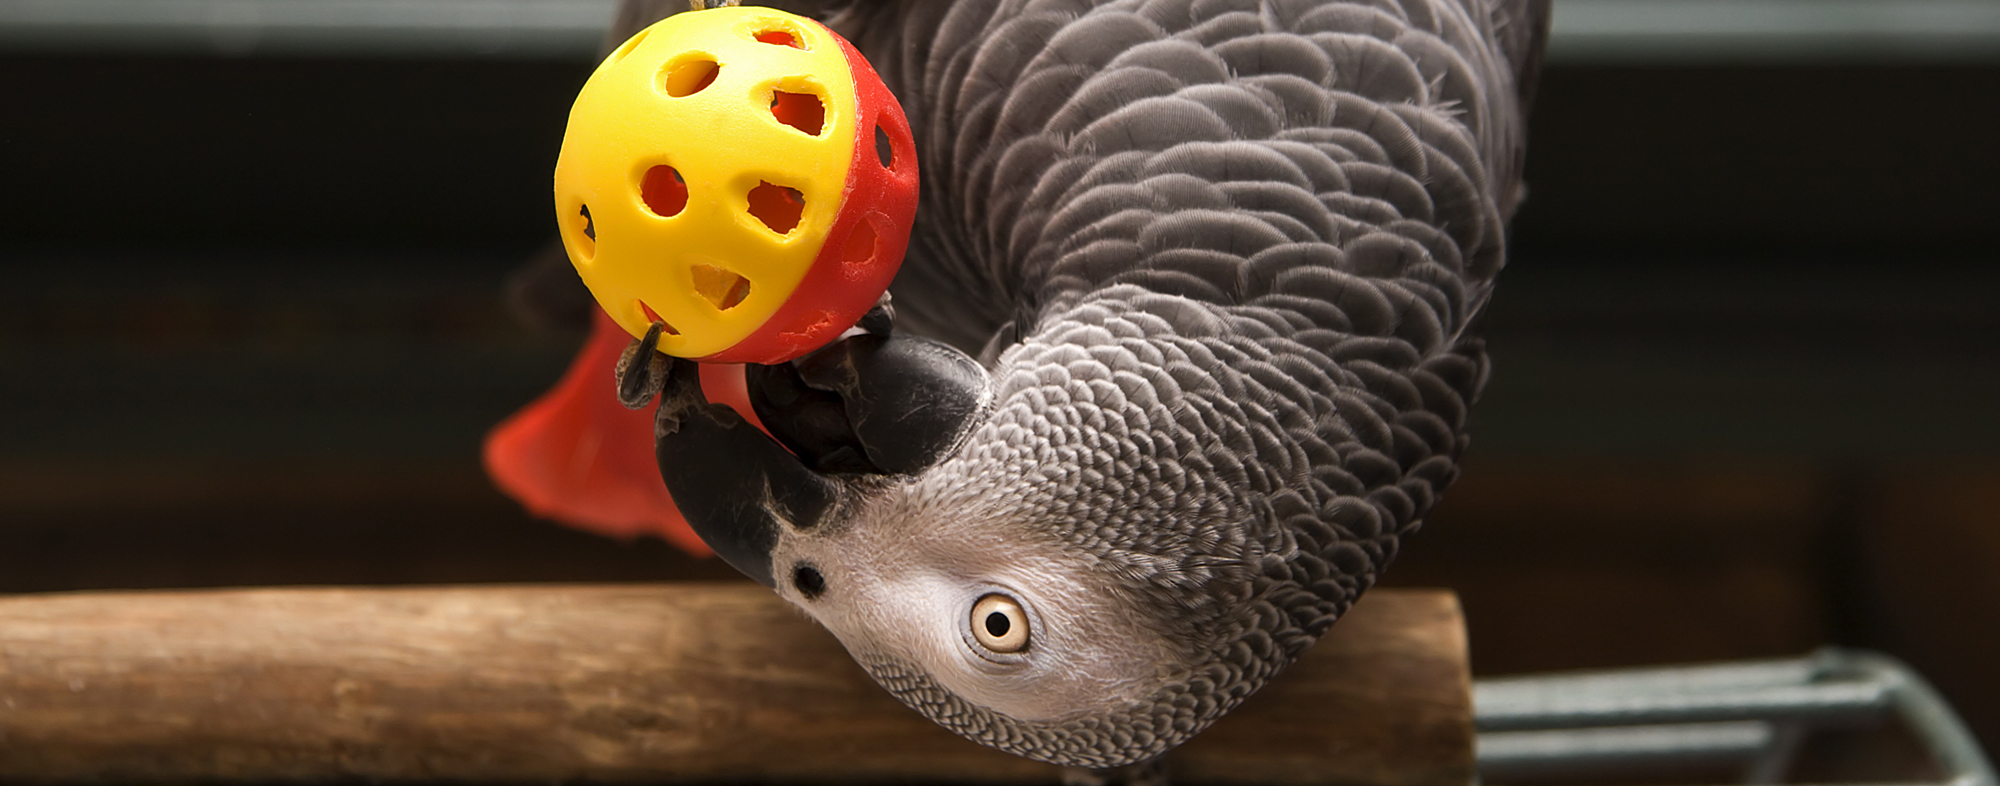 Perched on a branch, pet bird with grey plummage pokes a toy ball